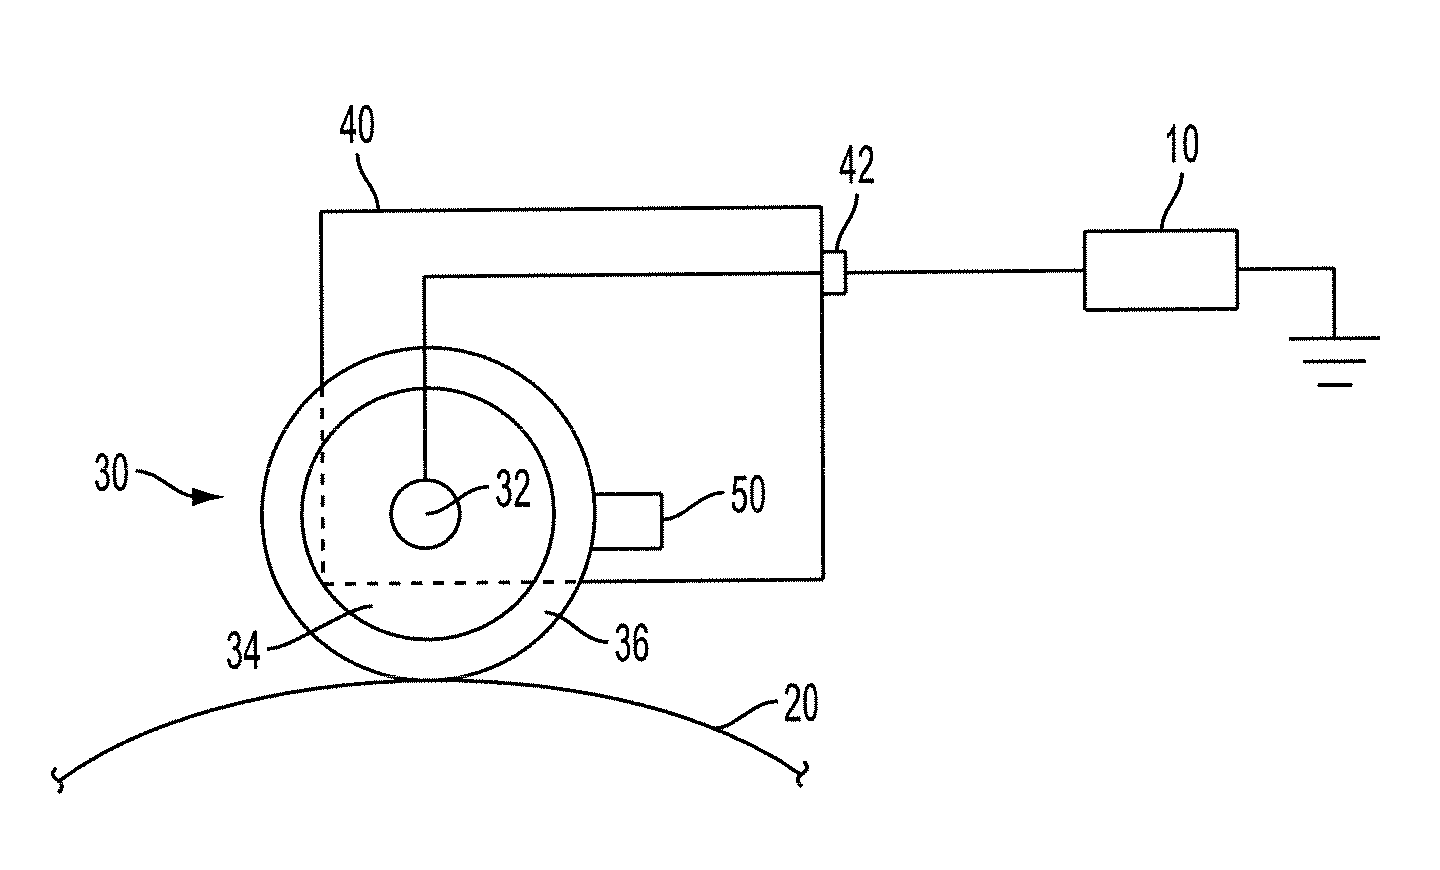 Bias charge roller comprising overcoat layer